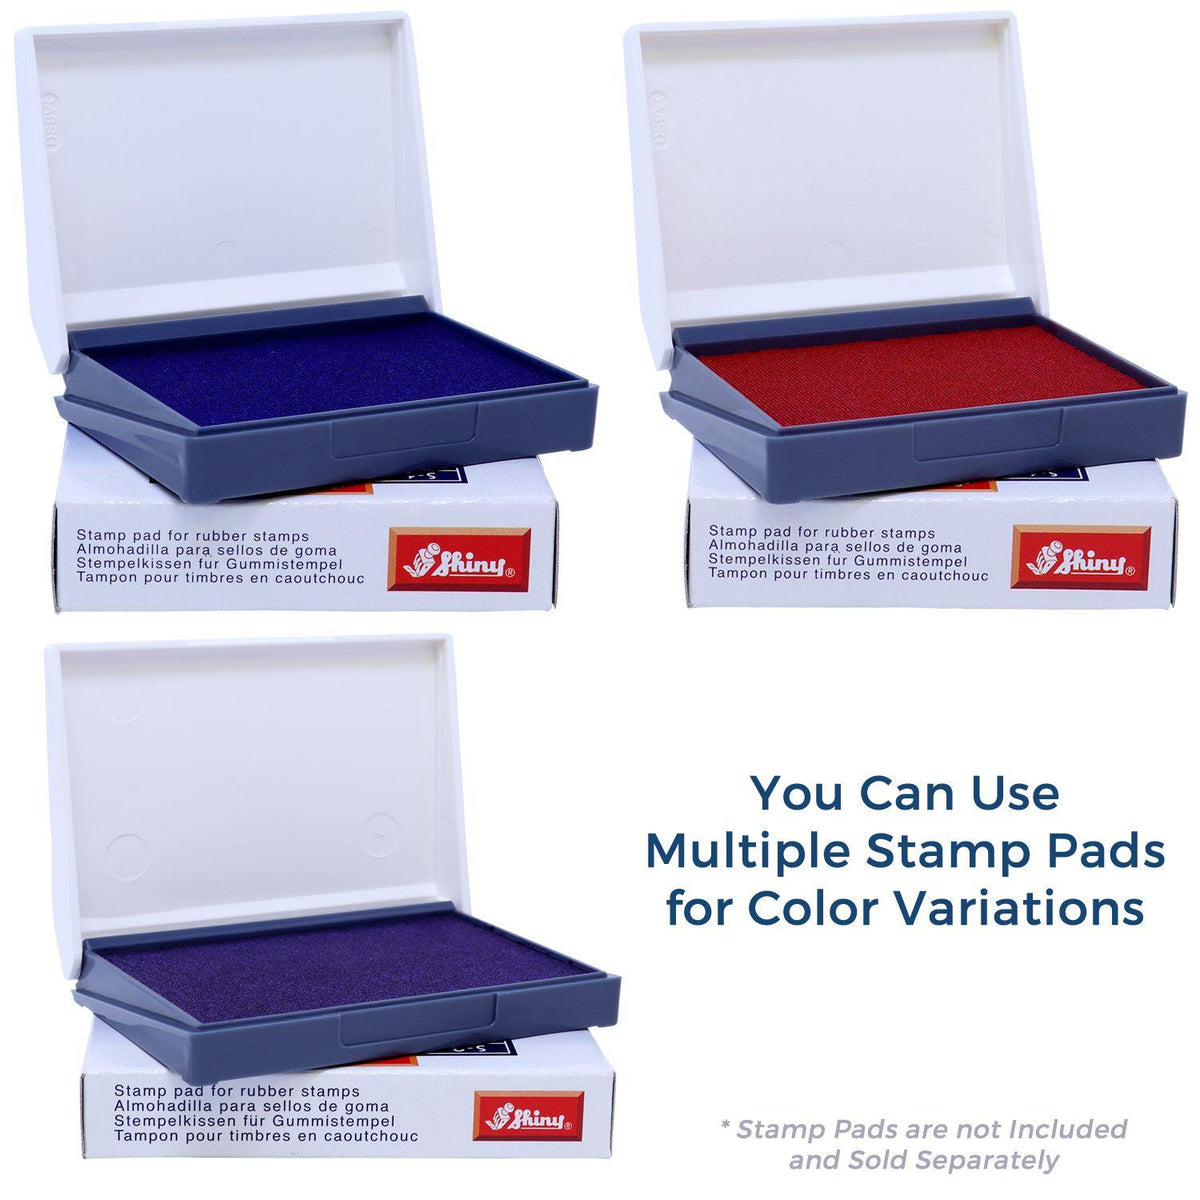 Stamp Pads for Large Debtor Exhibit Rubber Stamp Available